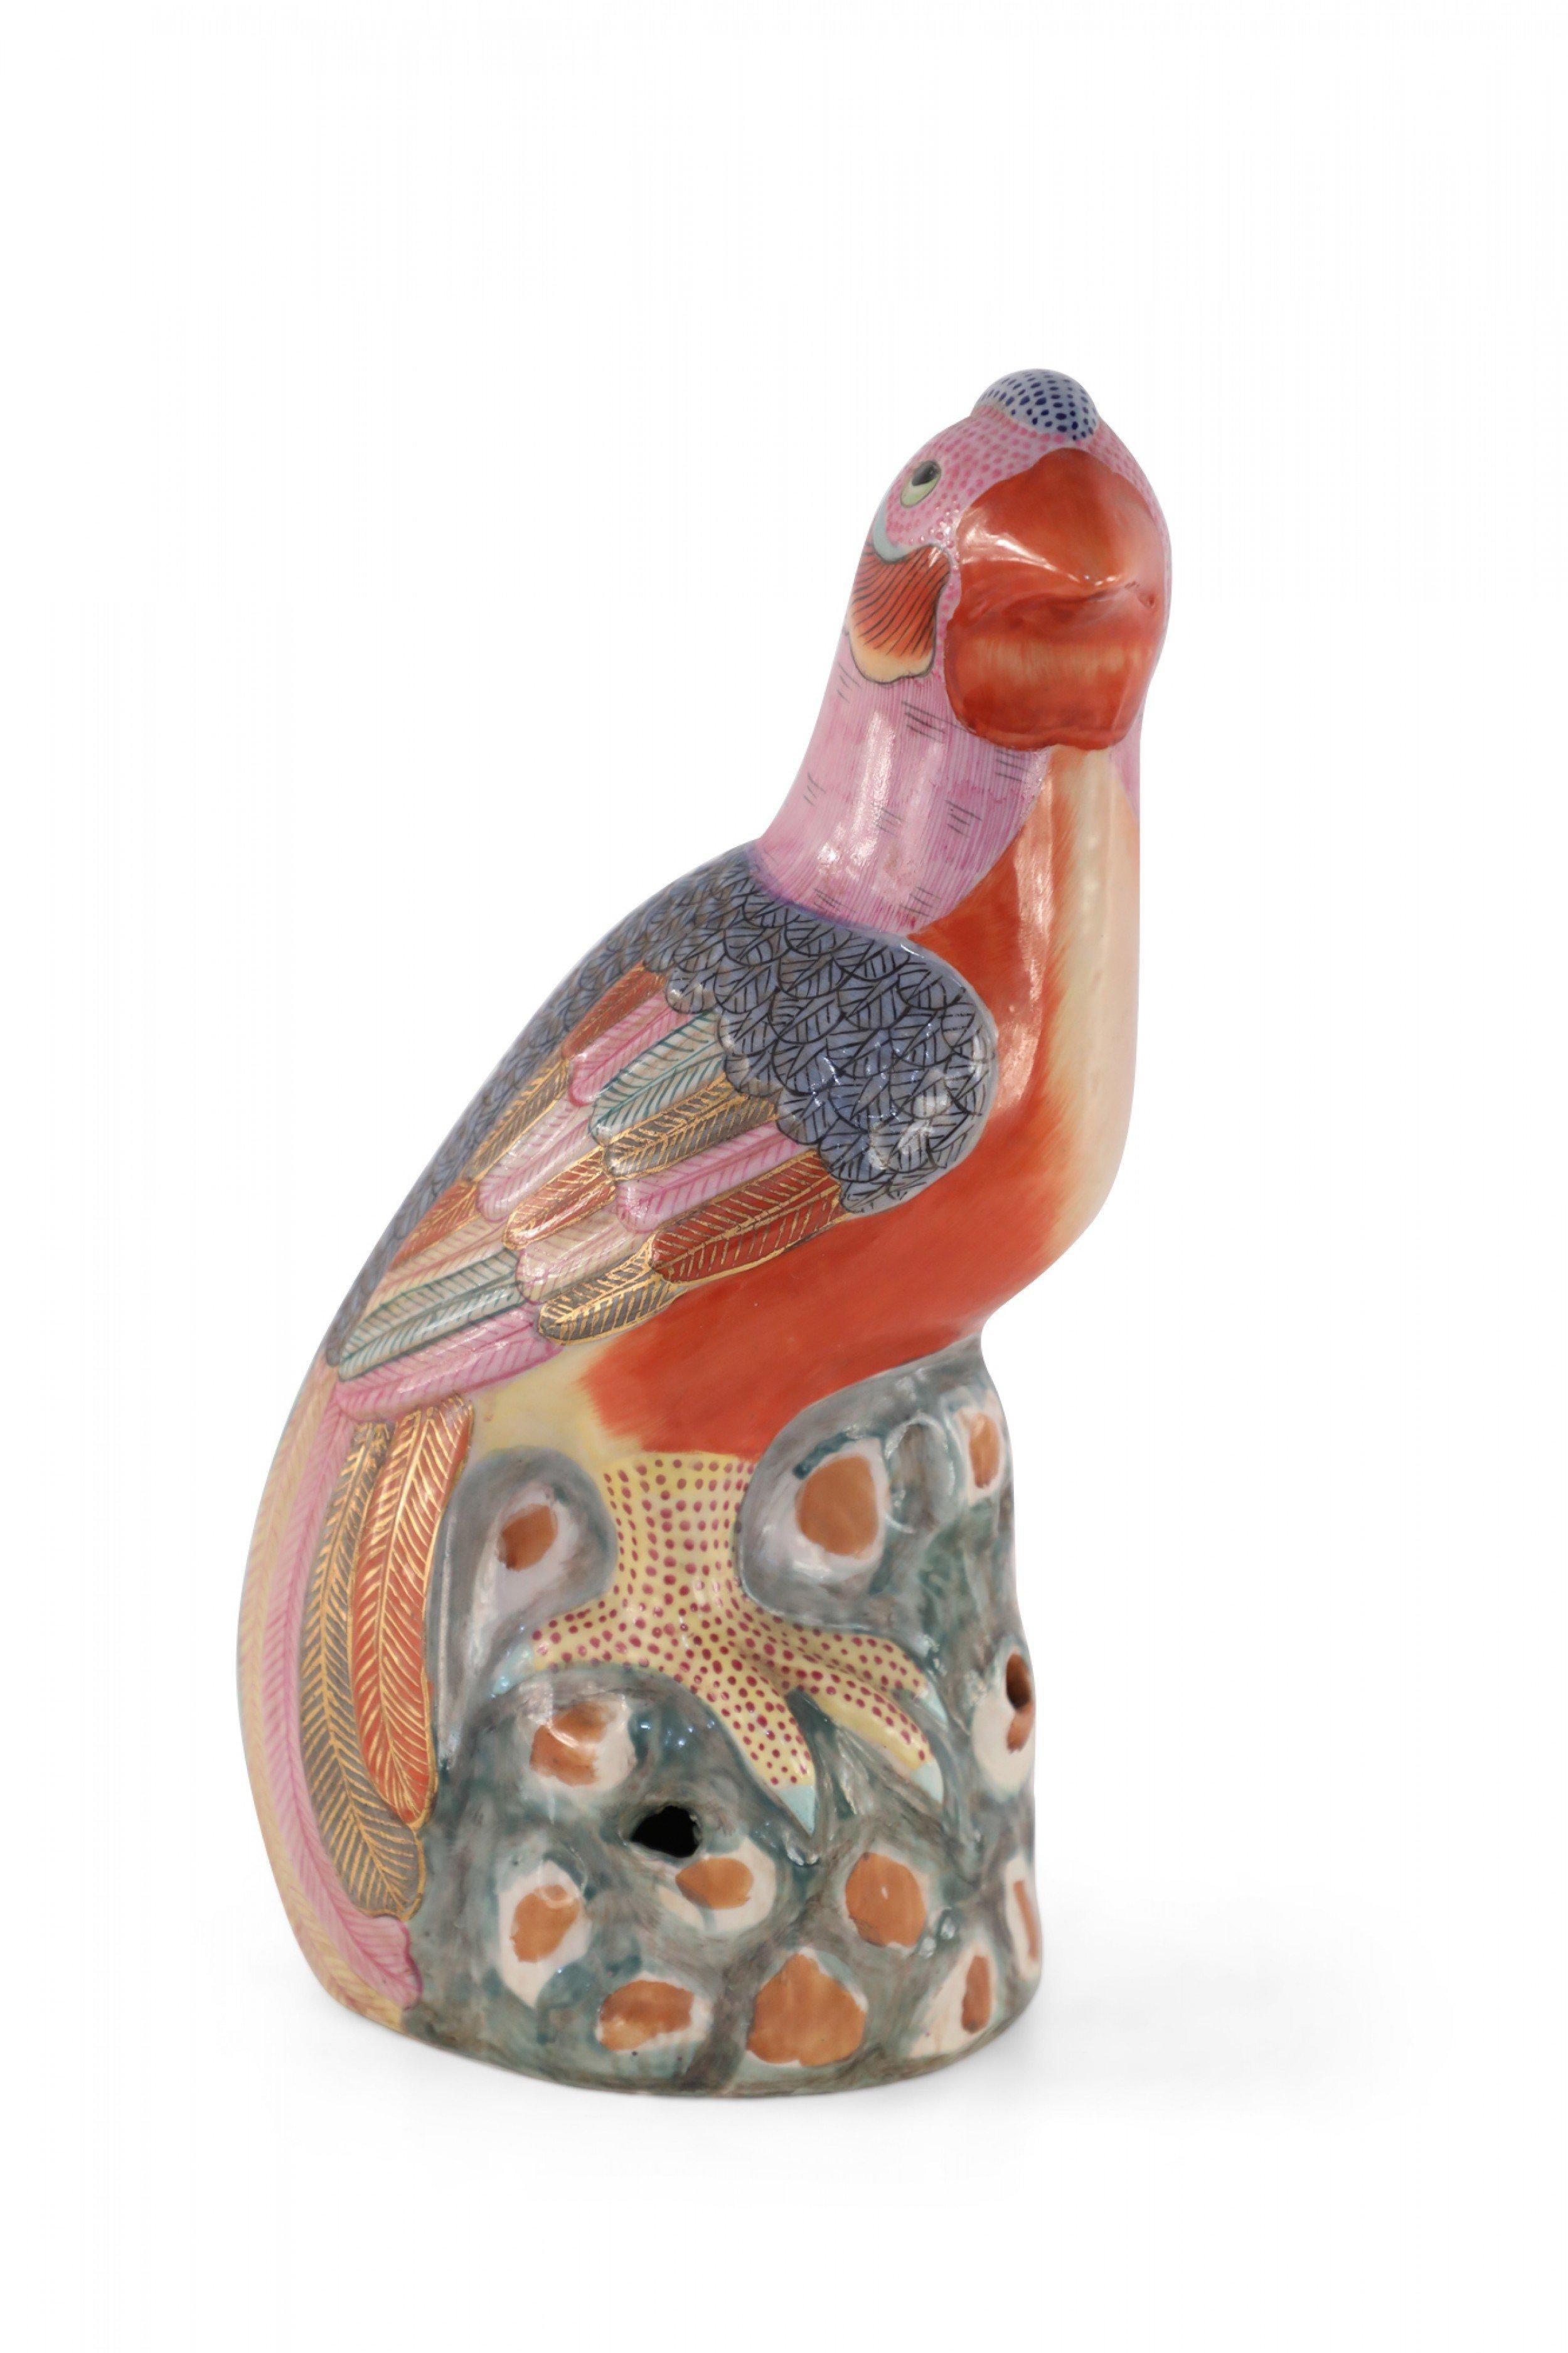 Antique Chinese (Mid 20th Century) glazed porcelain statue of a pheasant with colorful, gold-outlined plumes perched on a rocky formation of green and brown. (Smaller version available: NWL2187).